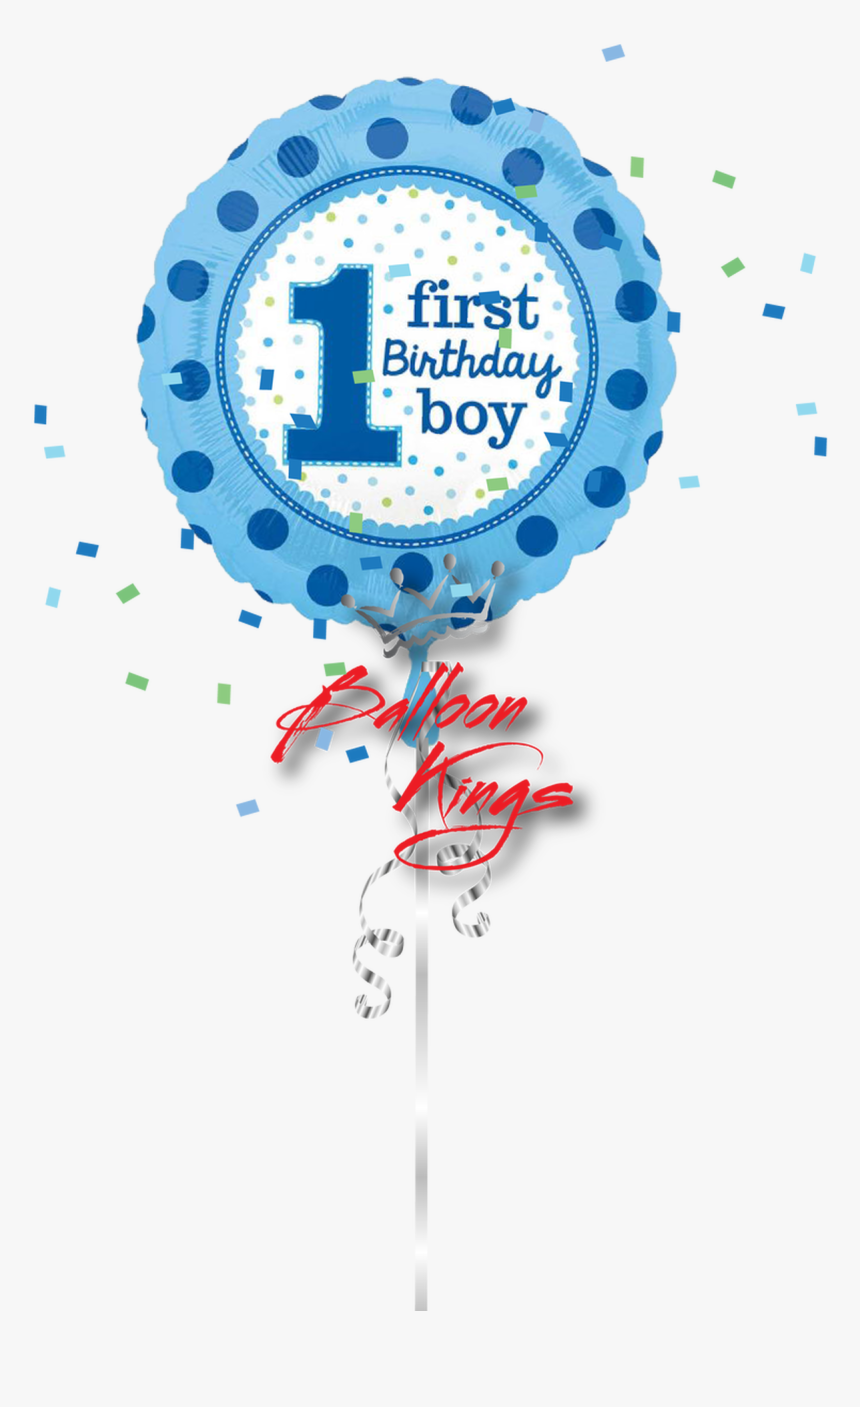 1st Birthday Boy - 1st Birthday Boy Balloons Png, Transparent Png, Free Download